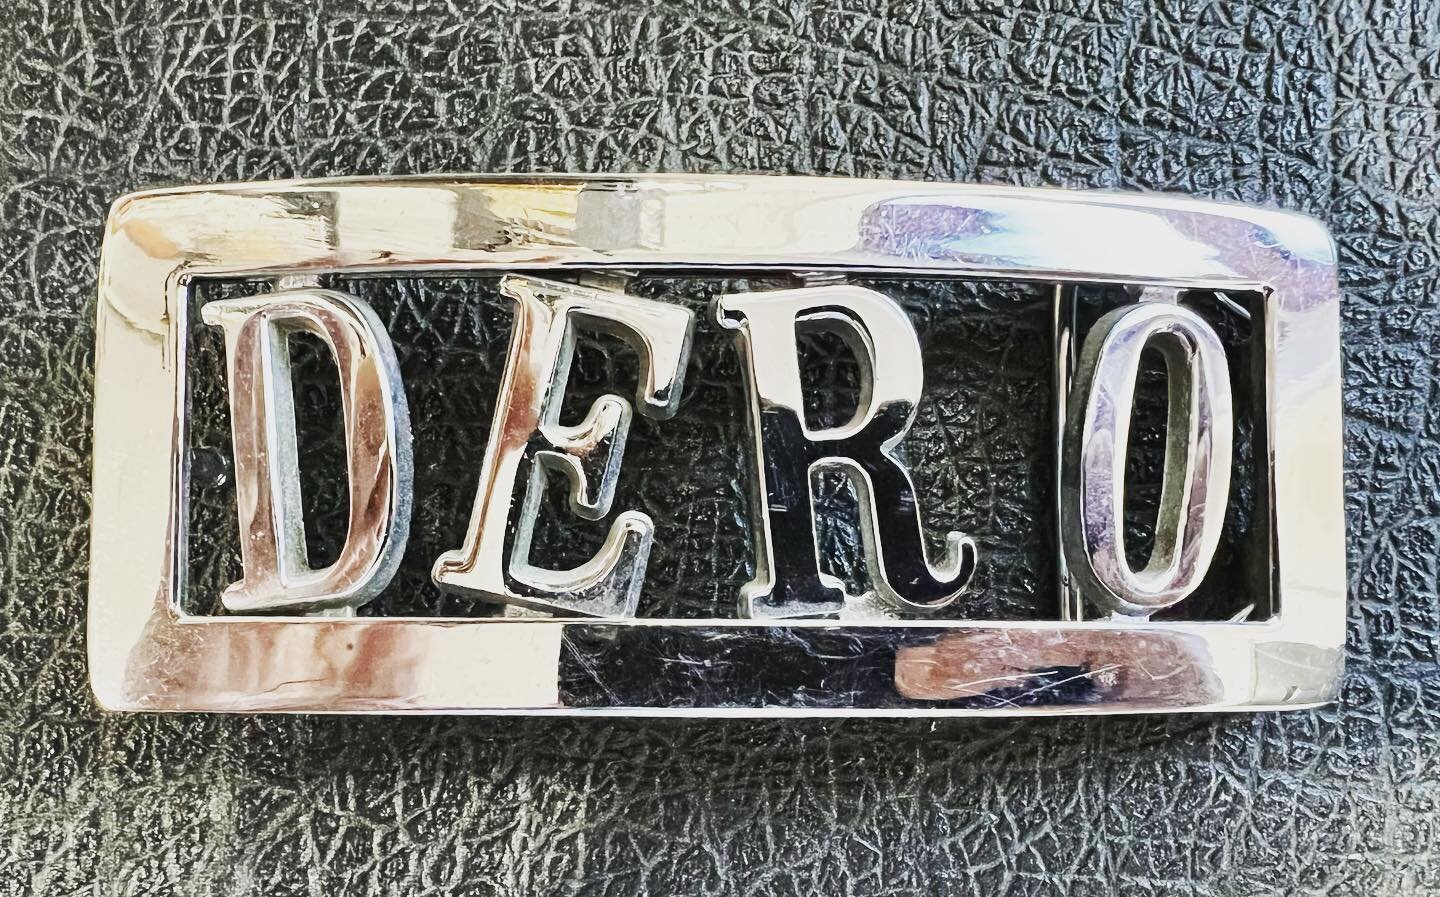 How old school am I? Ya that&rsquo;s right. This is my Tic Toc belt buckle from 1987. When others were getting straight letters, my brother @ne0nski and I got these at the East LA swap meet . As far as I know, I haven&rsquo;t seen anyone else rock th